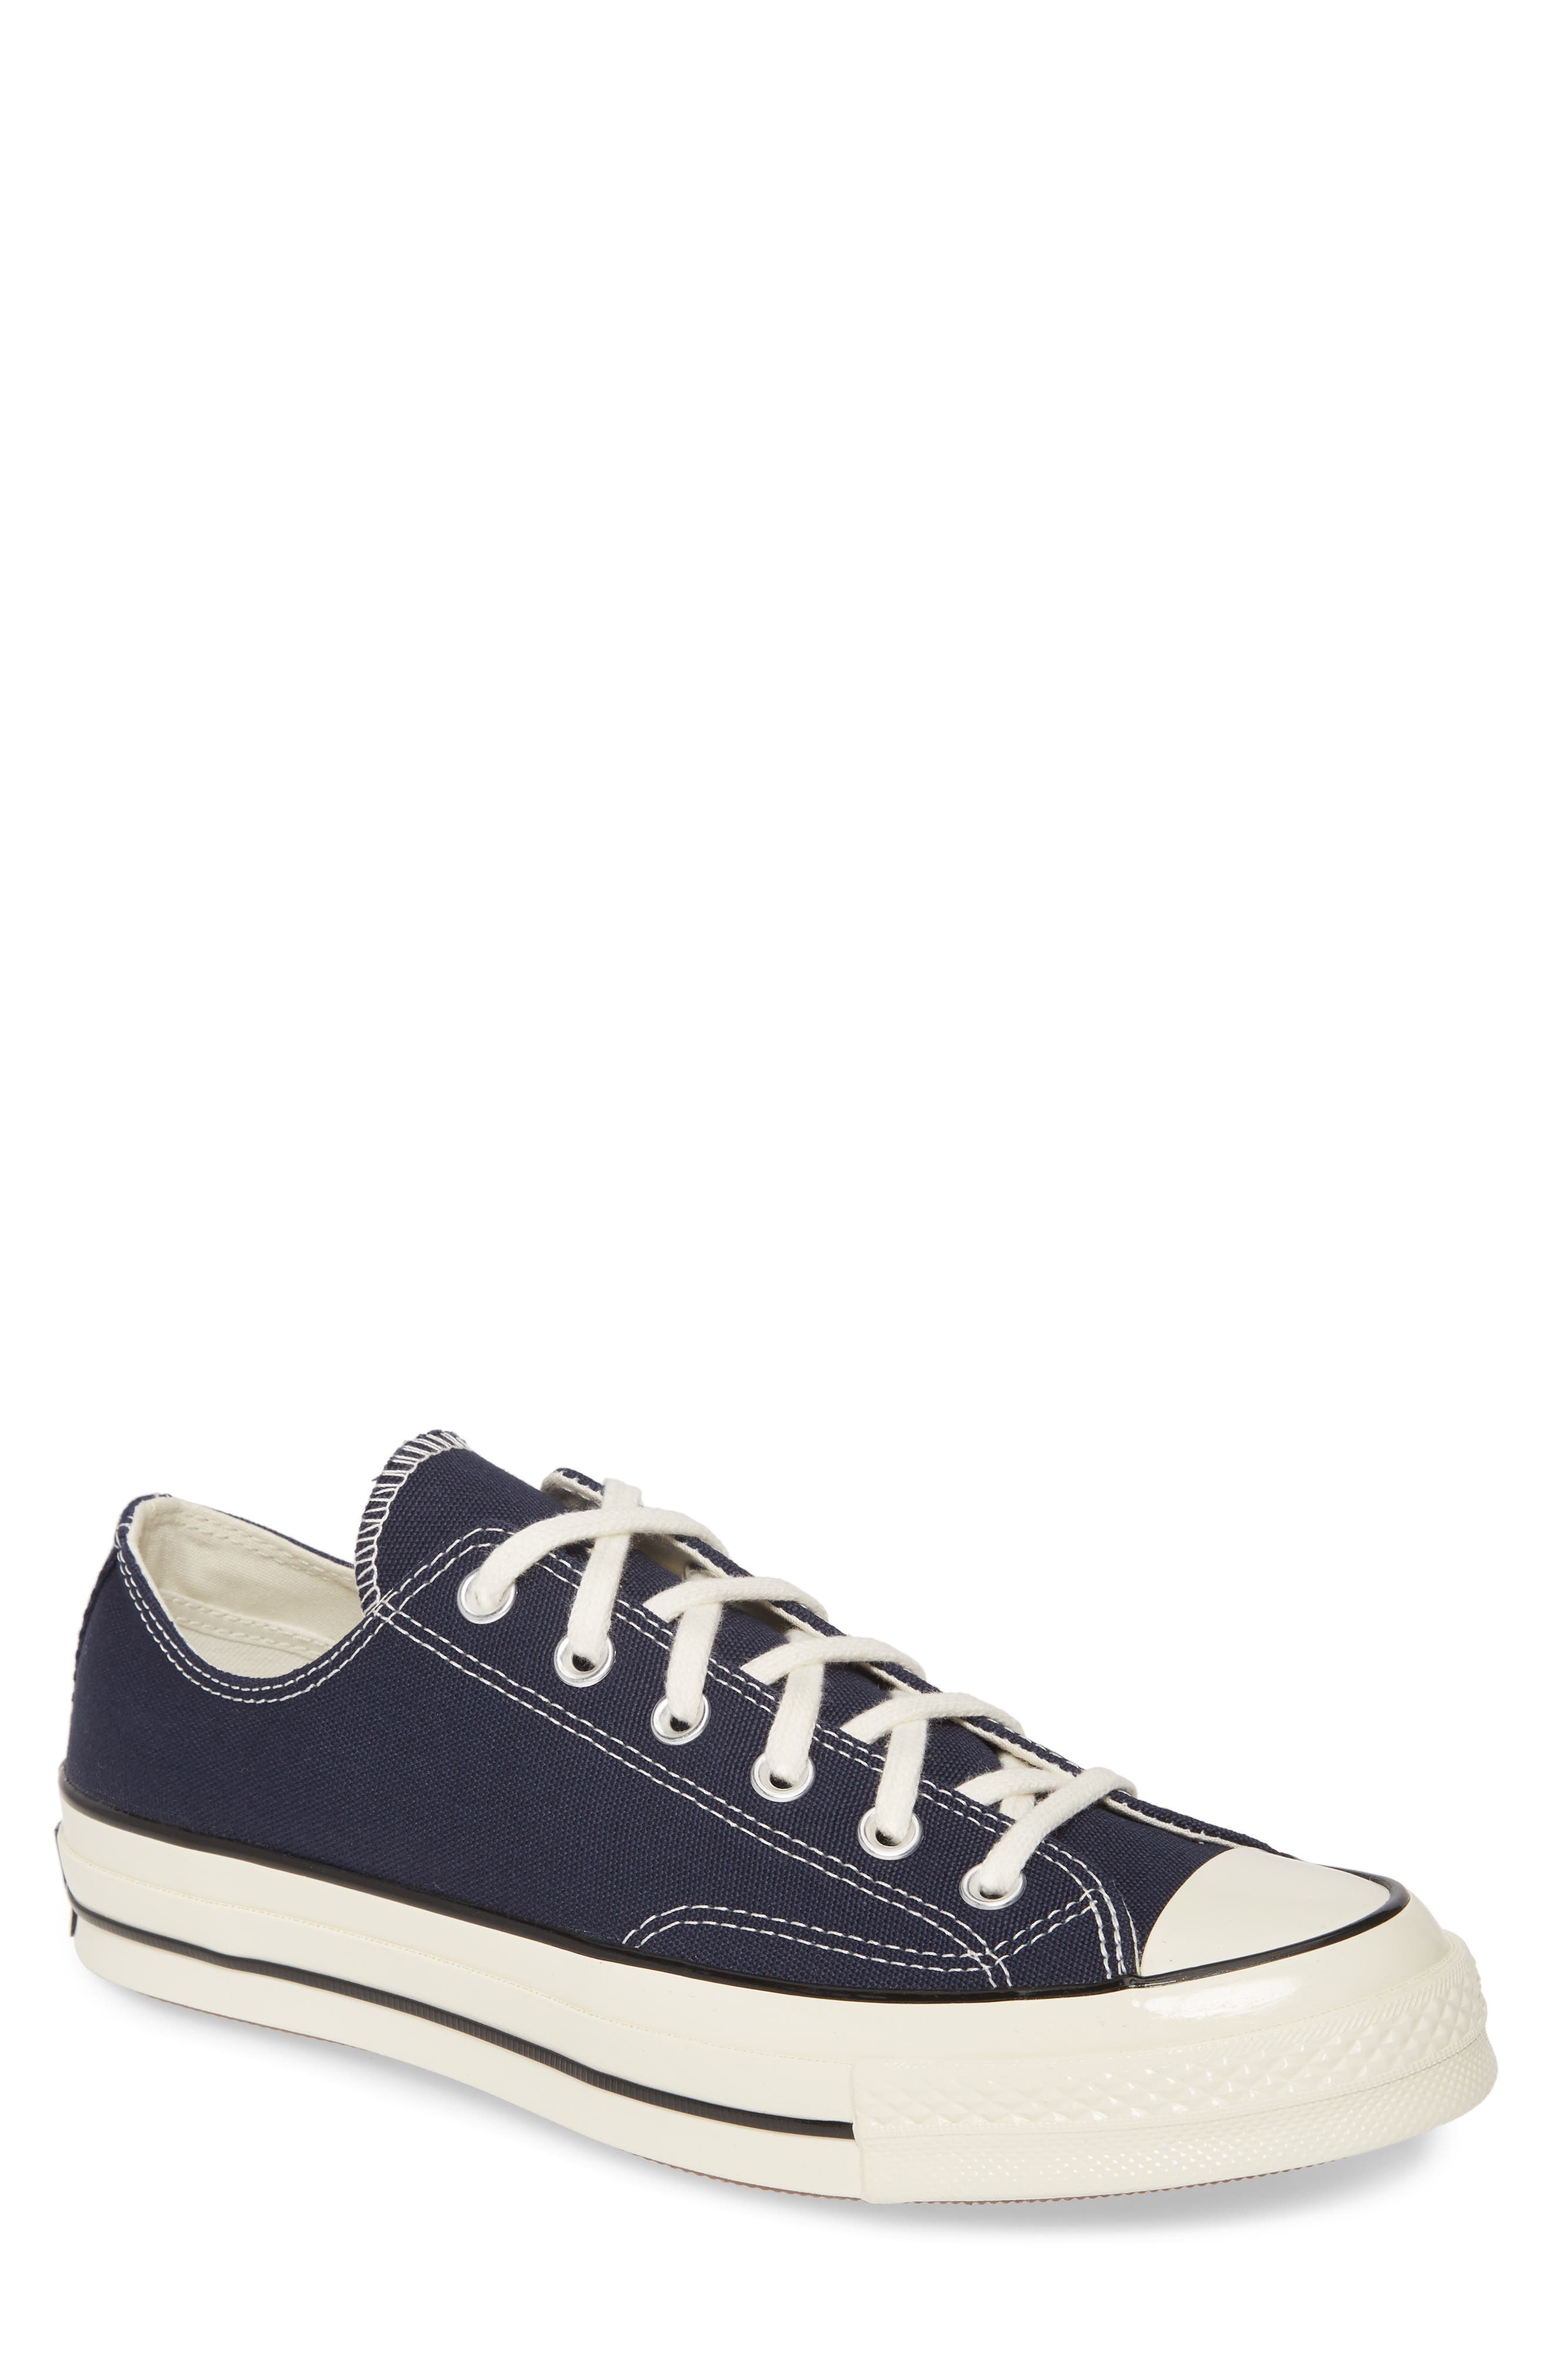 mens converse sale clearance